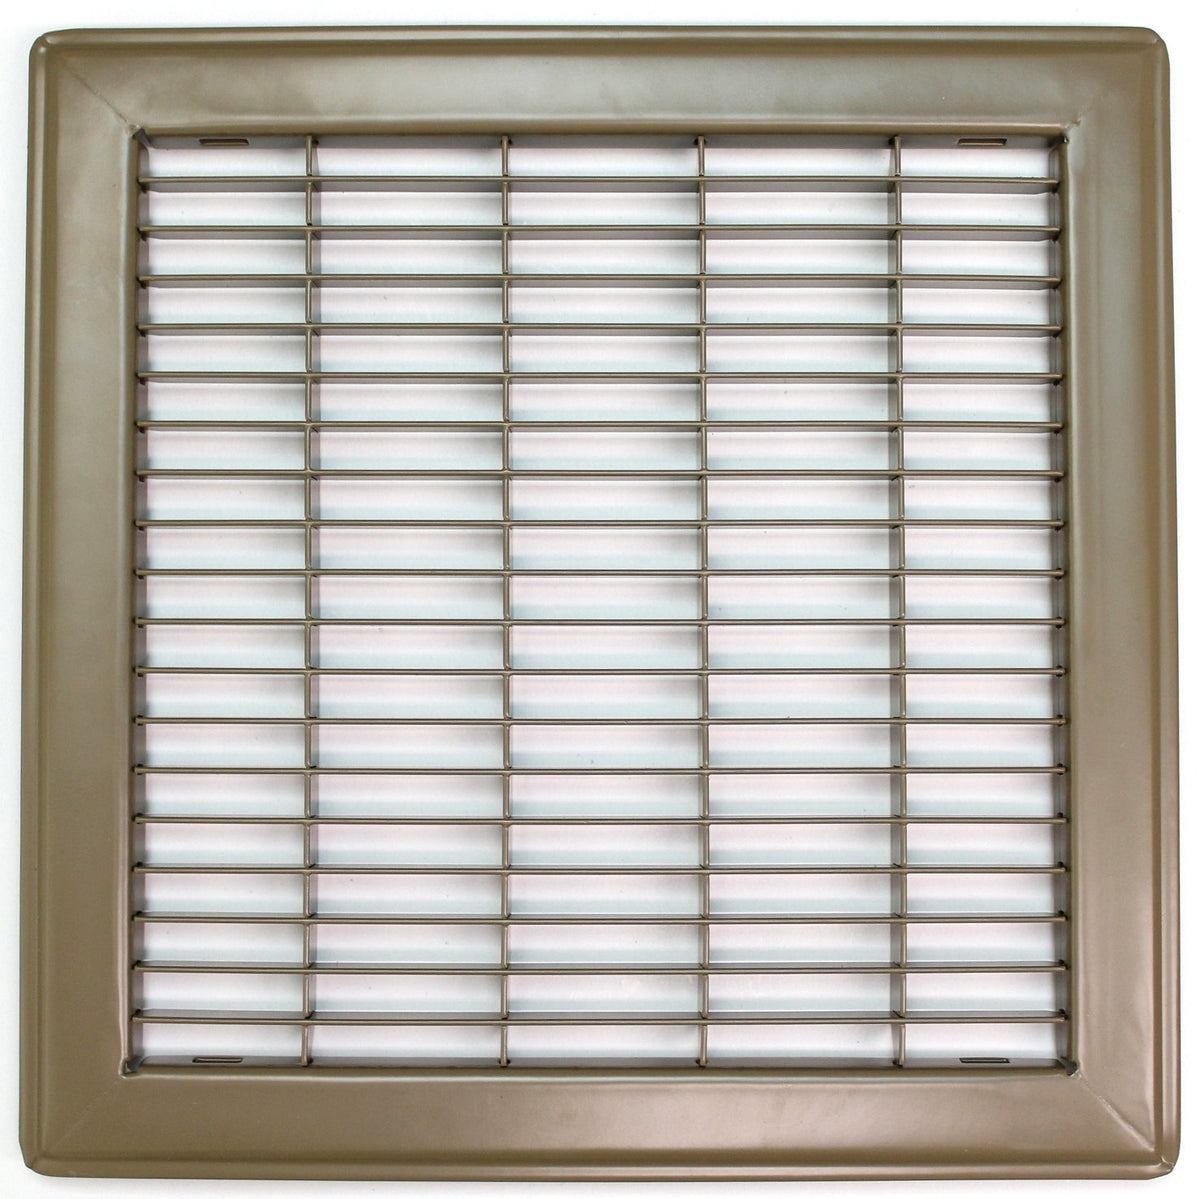 10&quot; X 14&quot; or 14&quot; X 10&quot; Heavy Duty Floor Grille - Fixed Blades Air Grille - Brown [Outer Dimensions: 11.75 X 15.75]